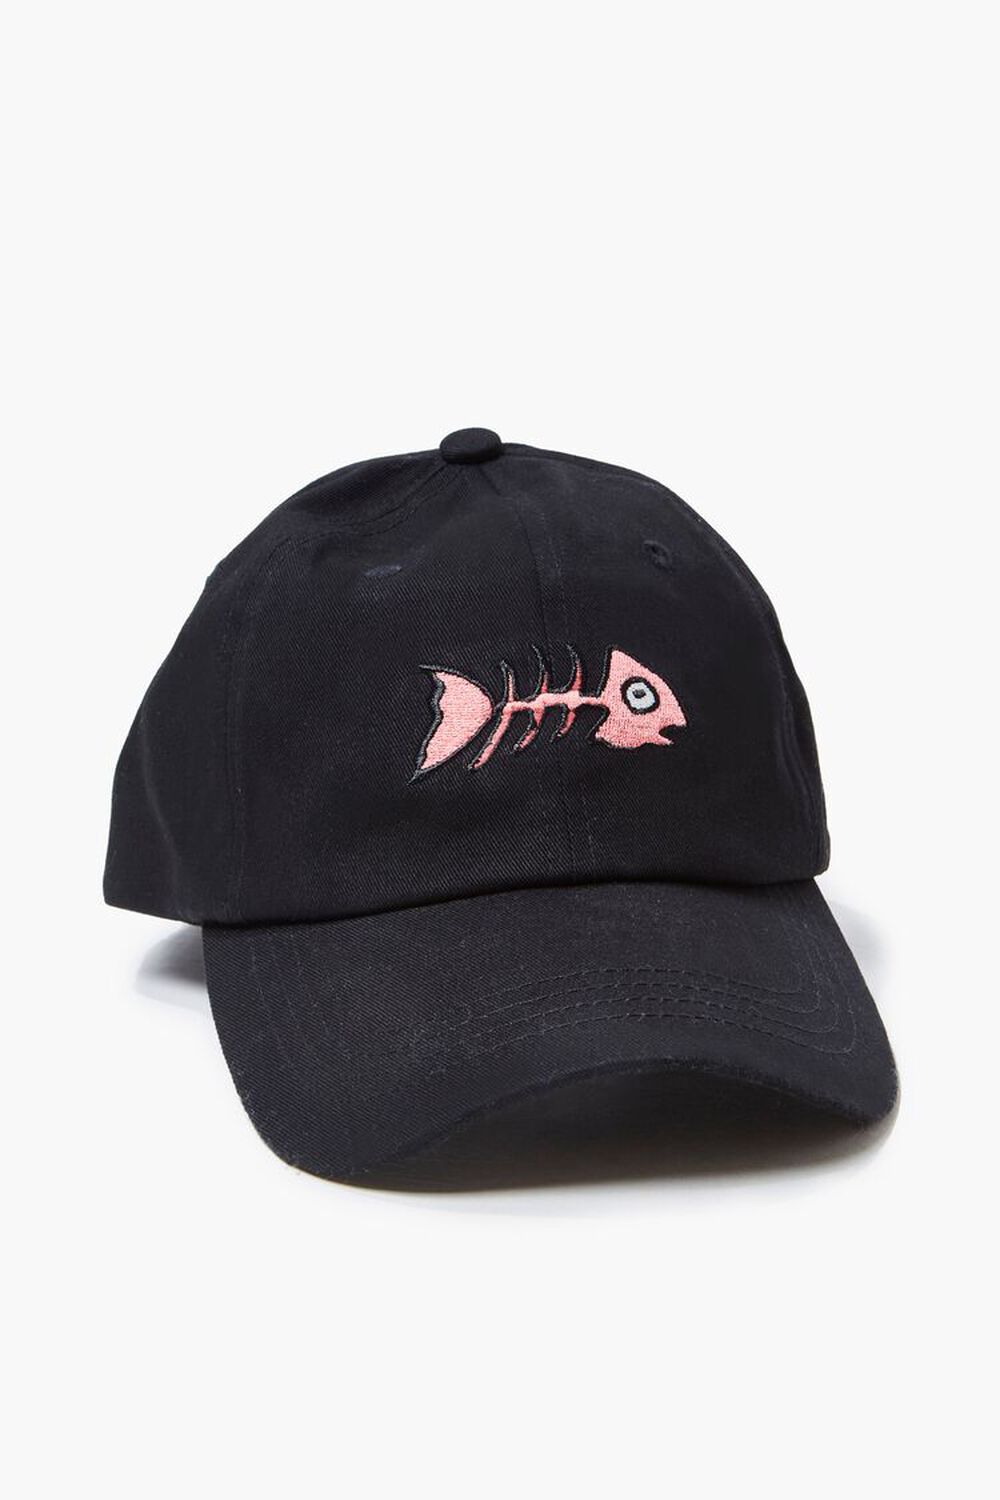 BLACK/PINK Fishbone Embroidered Graphic Dad Cap, image 1